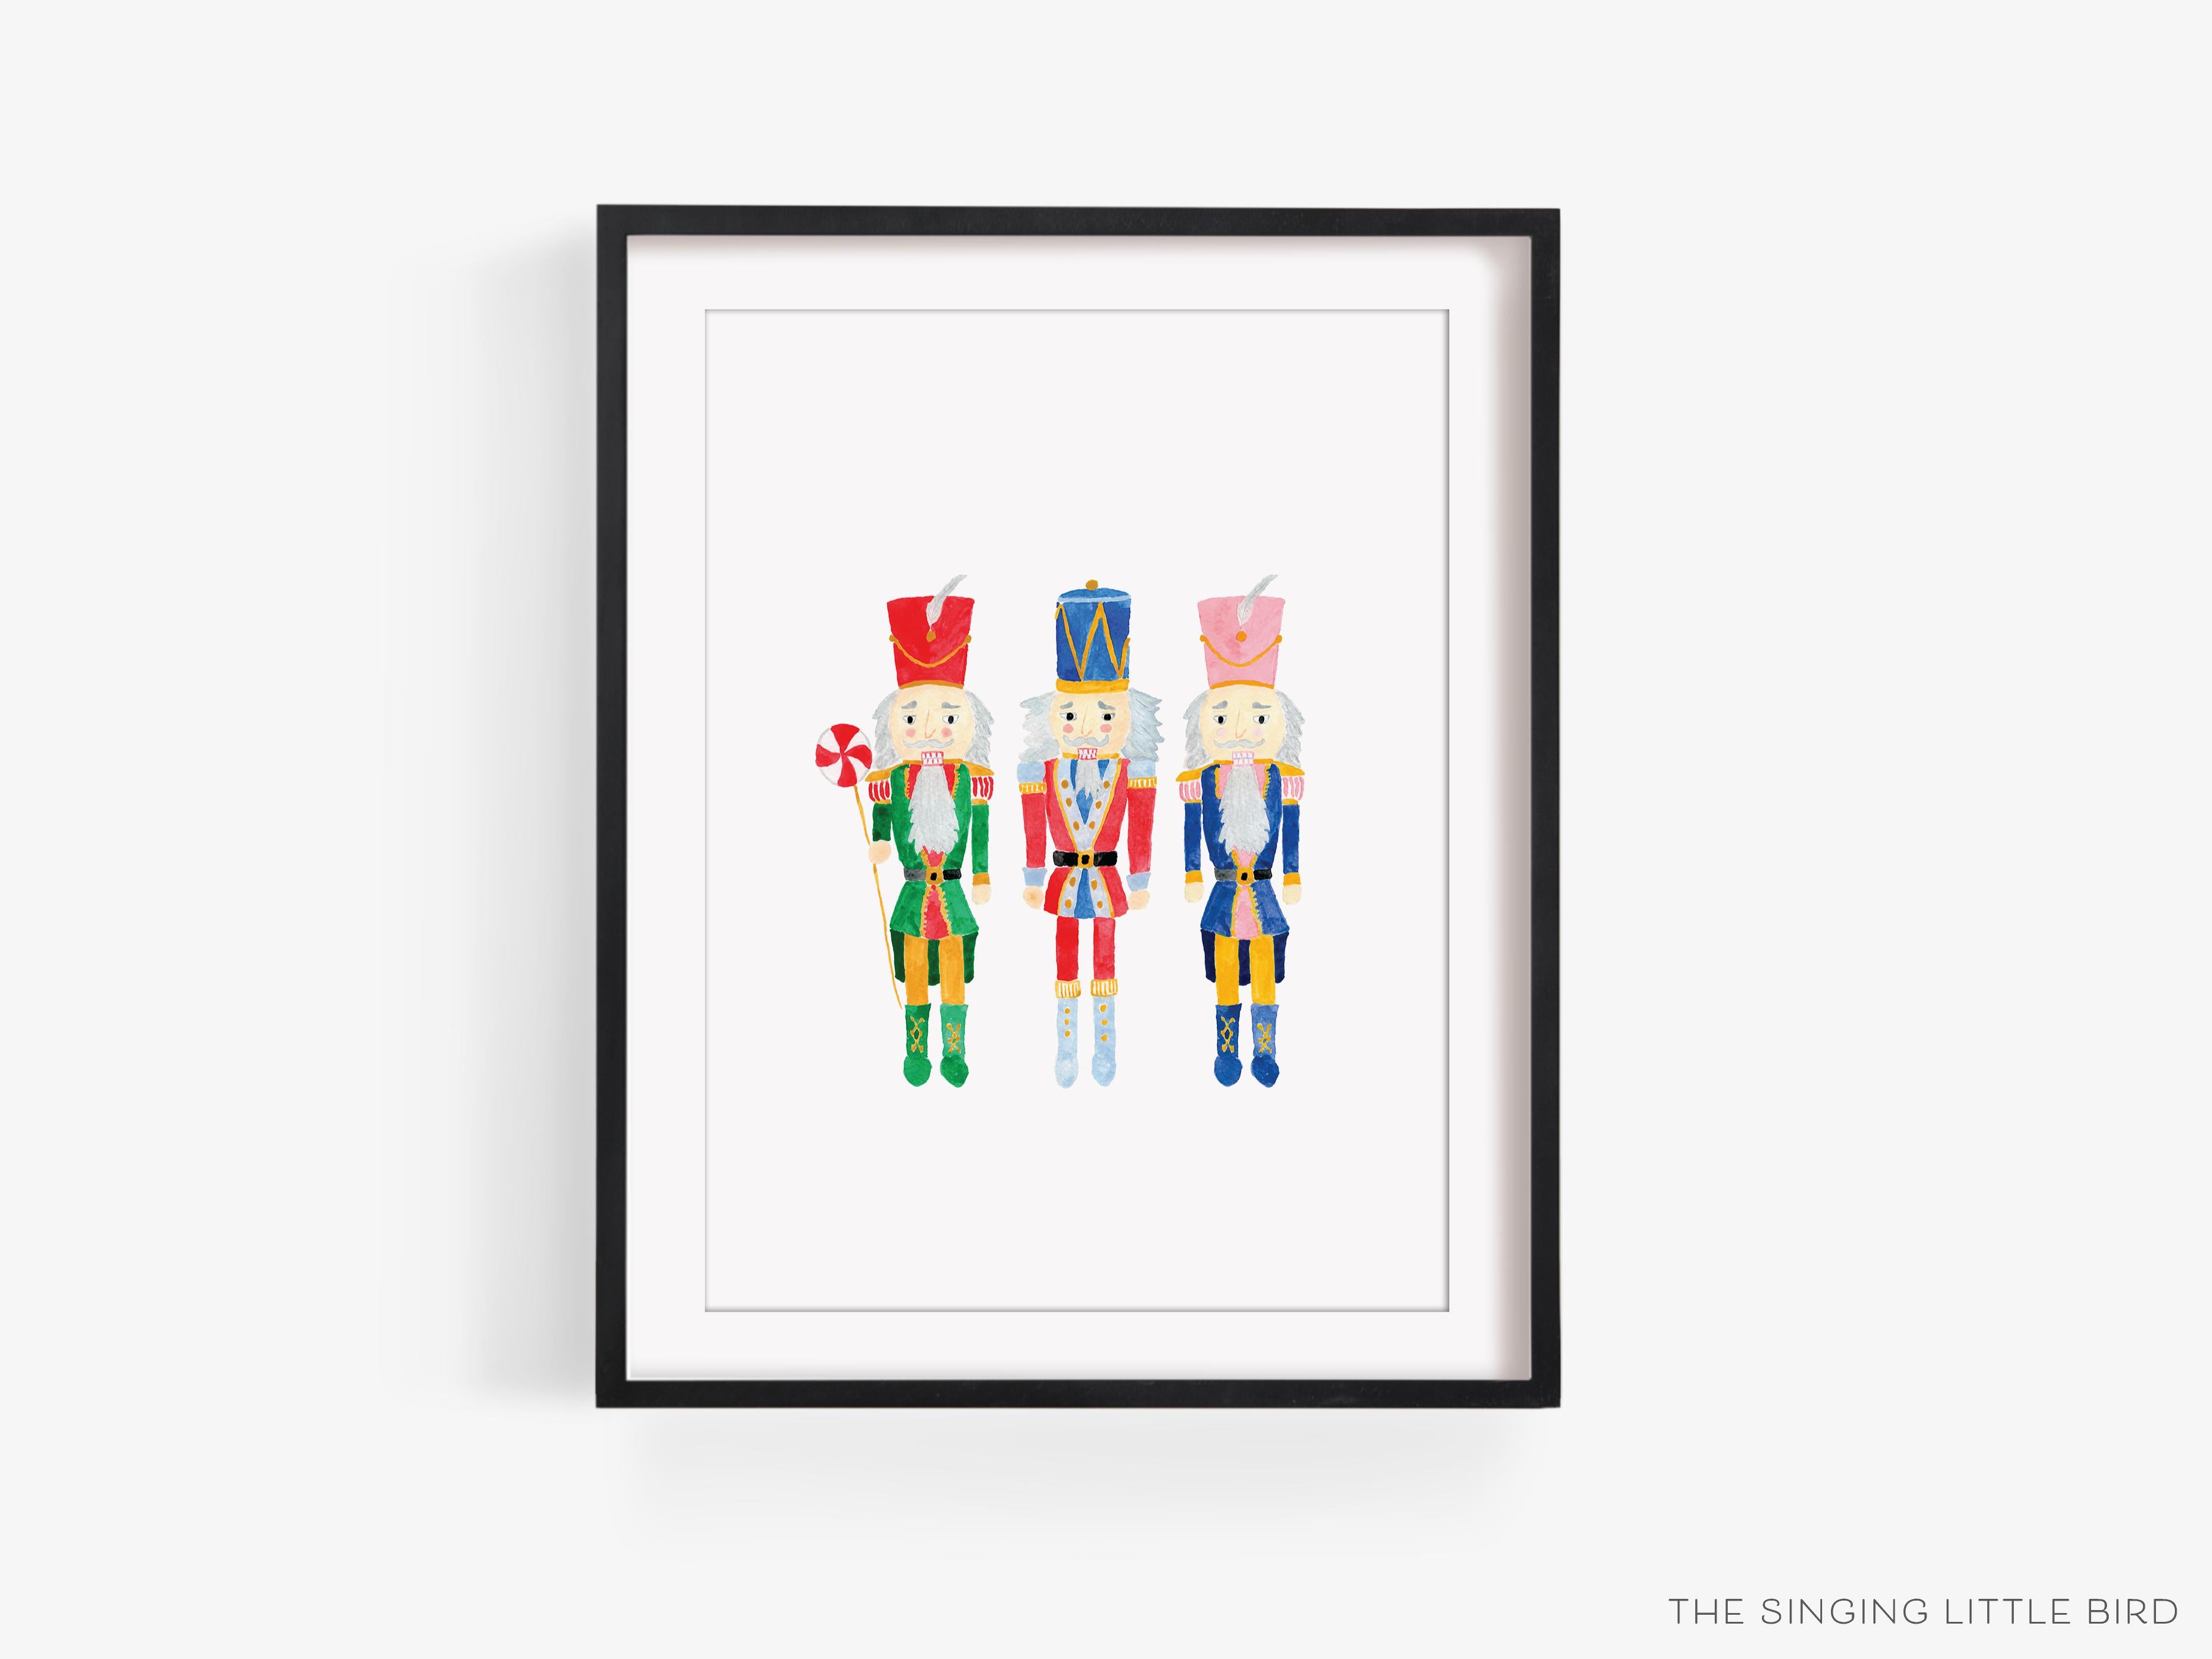 Nutcracker Trio Art Print-This watercolor art print features our hand-painted nutcrackers, printed in the USA on 120lb high quality art paper. This makes a great gift or wall decor for the nutcracker lover in your life.-The Singing Little Bird